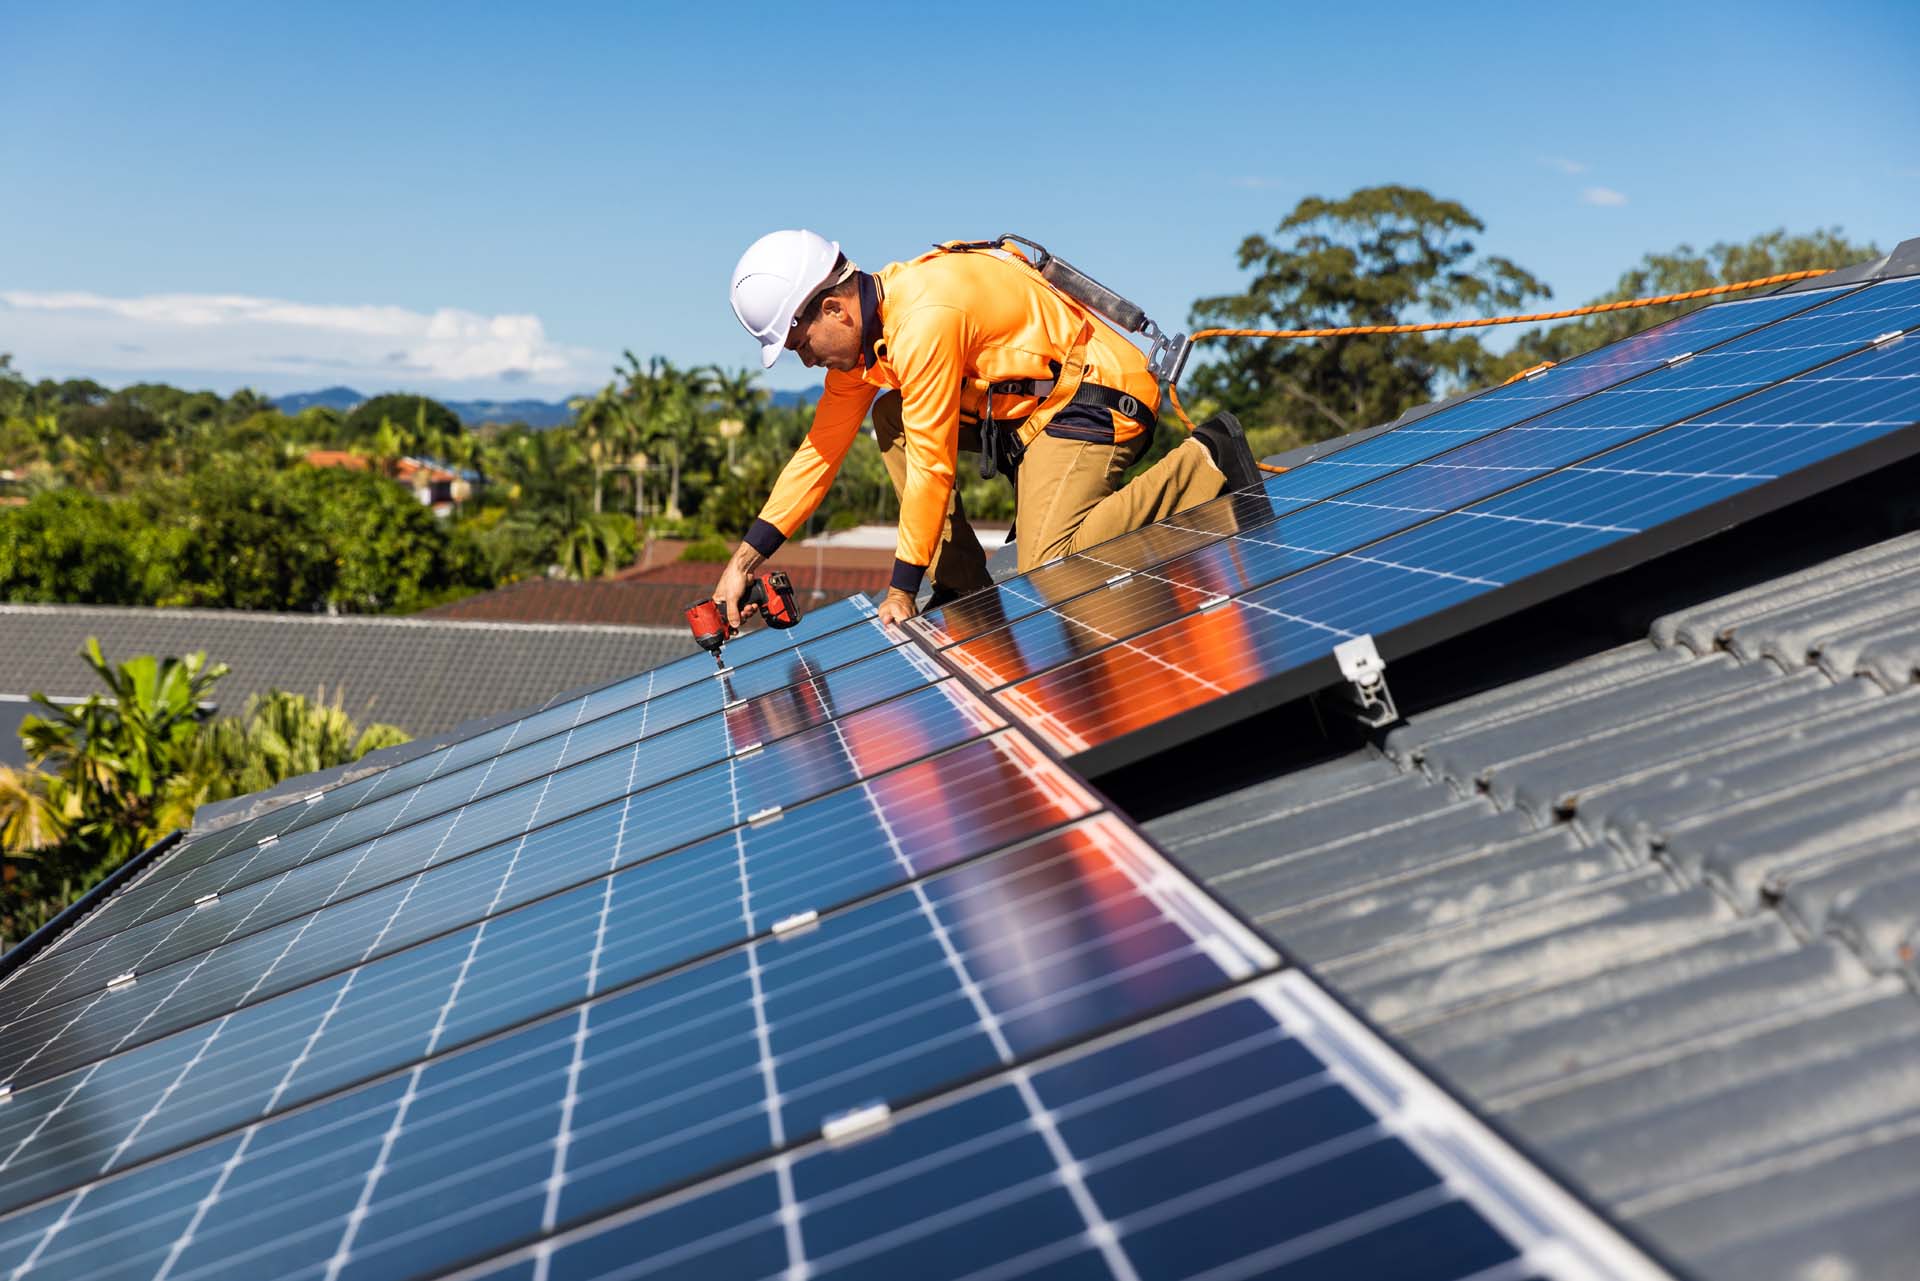 An expert installing solar panels on the roof of a house